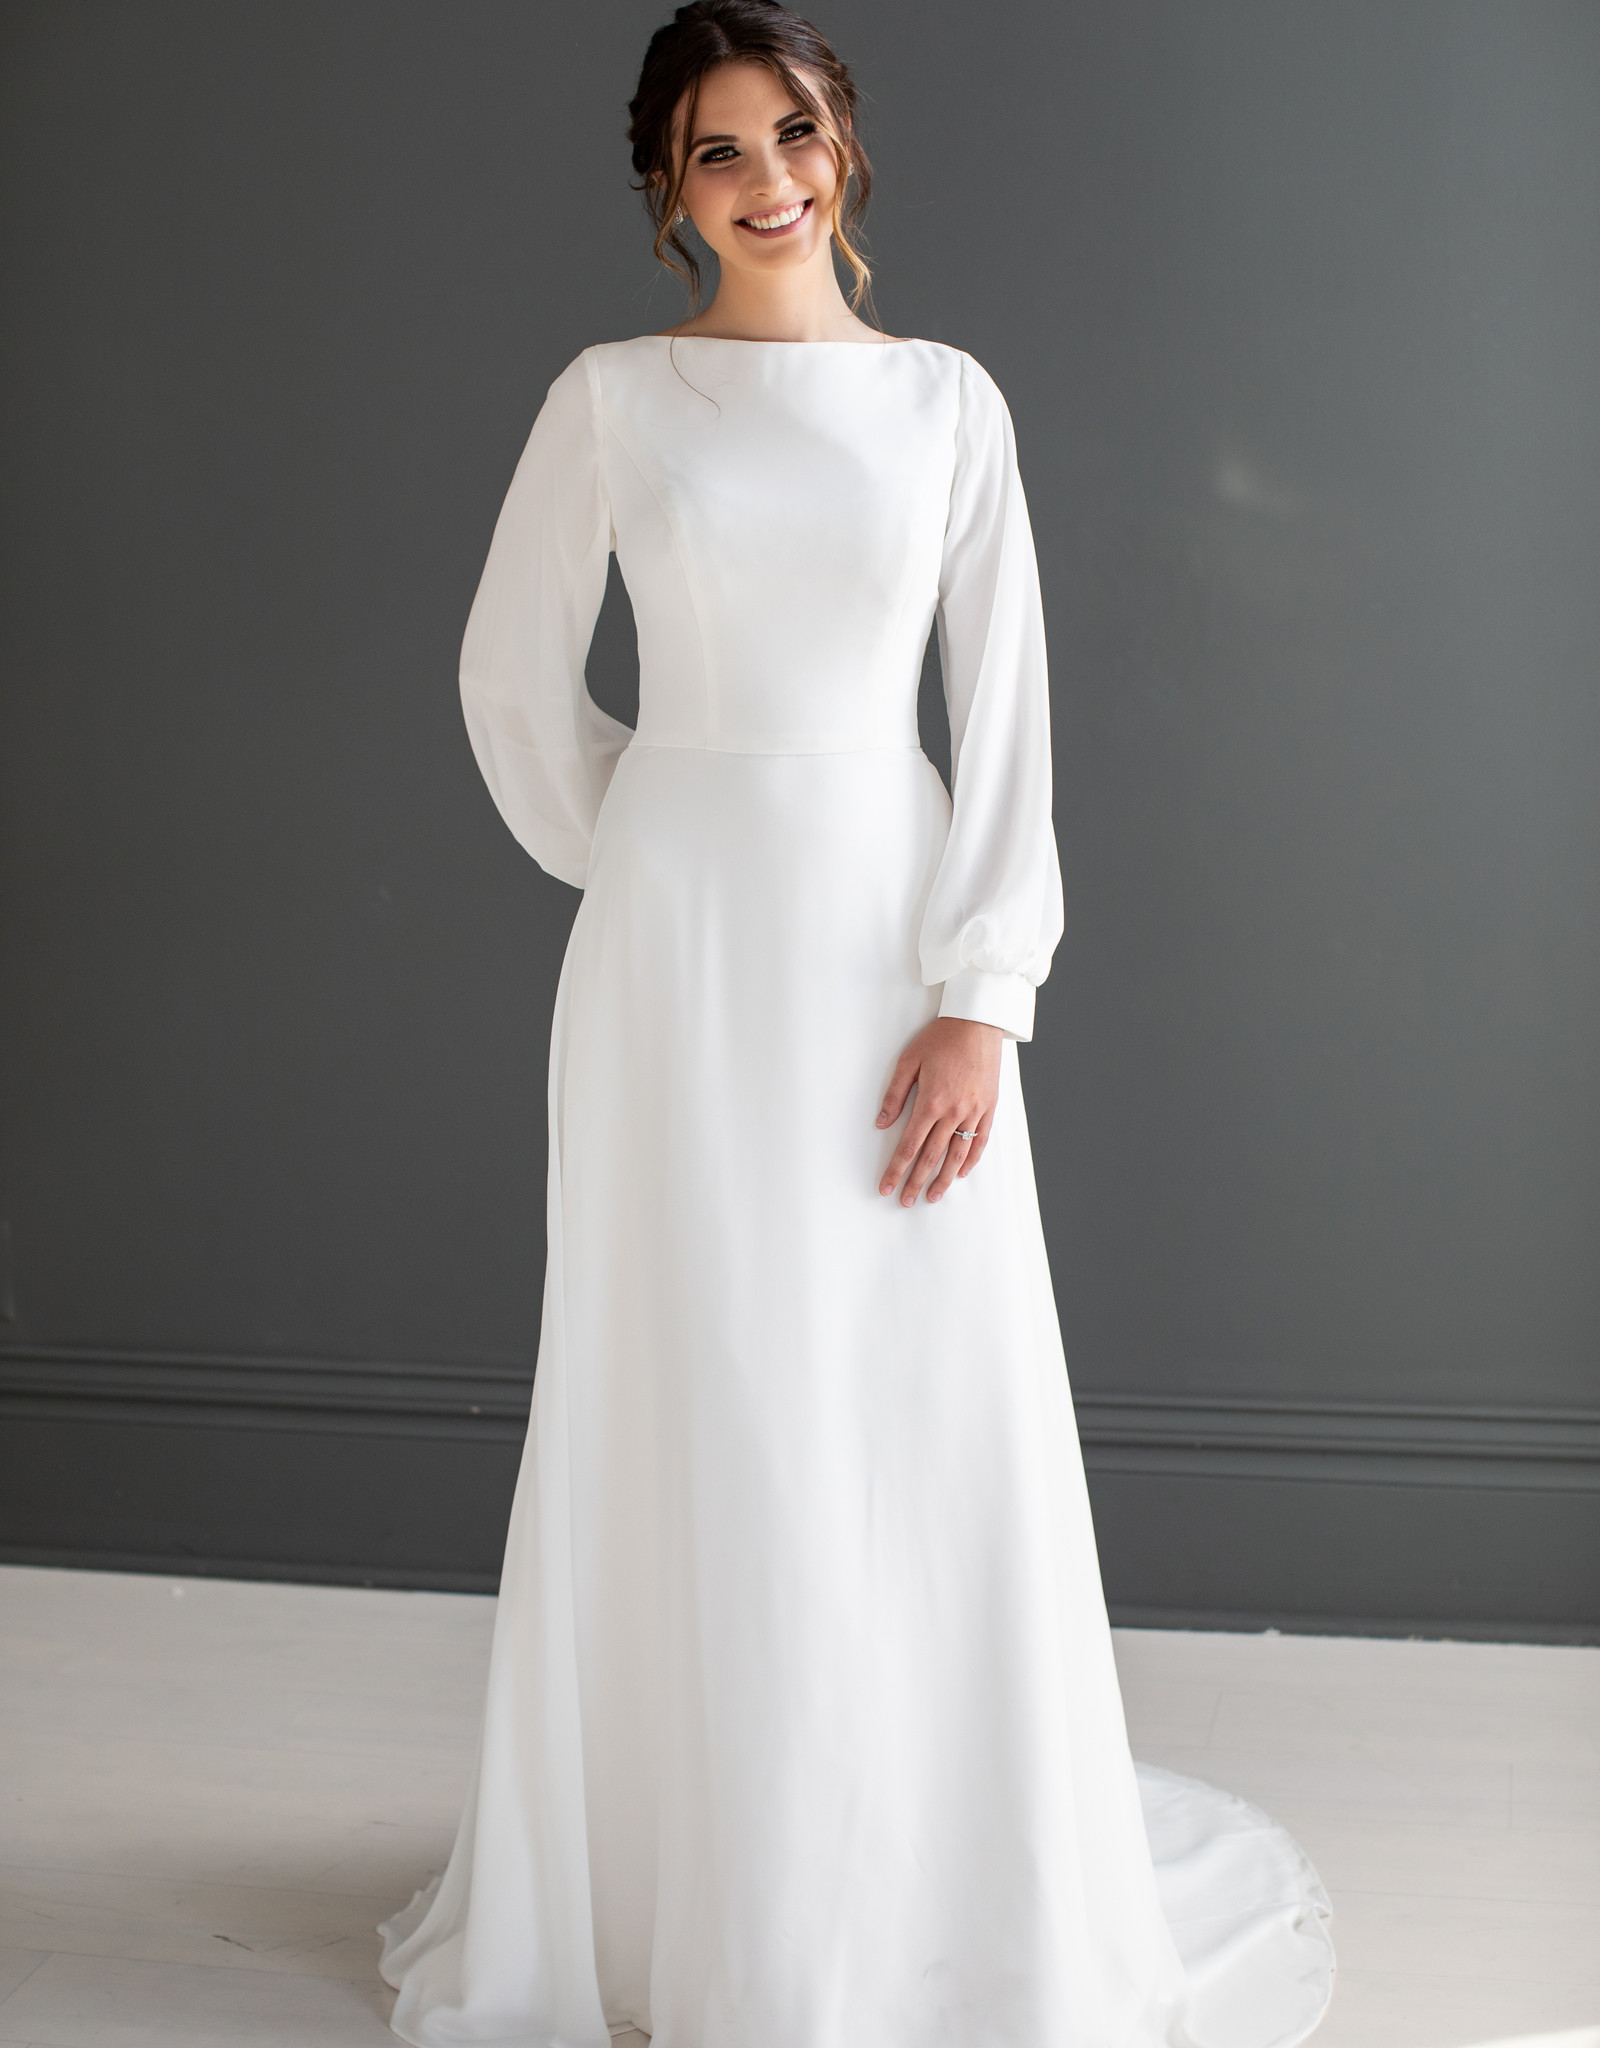 The Modest Bridal Collection Valerie